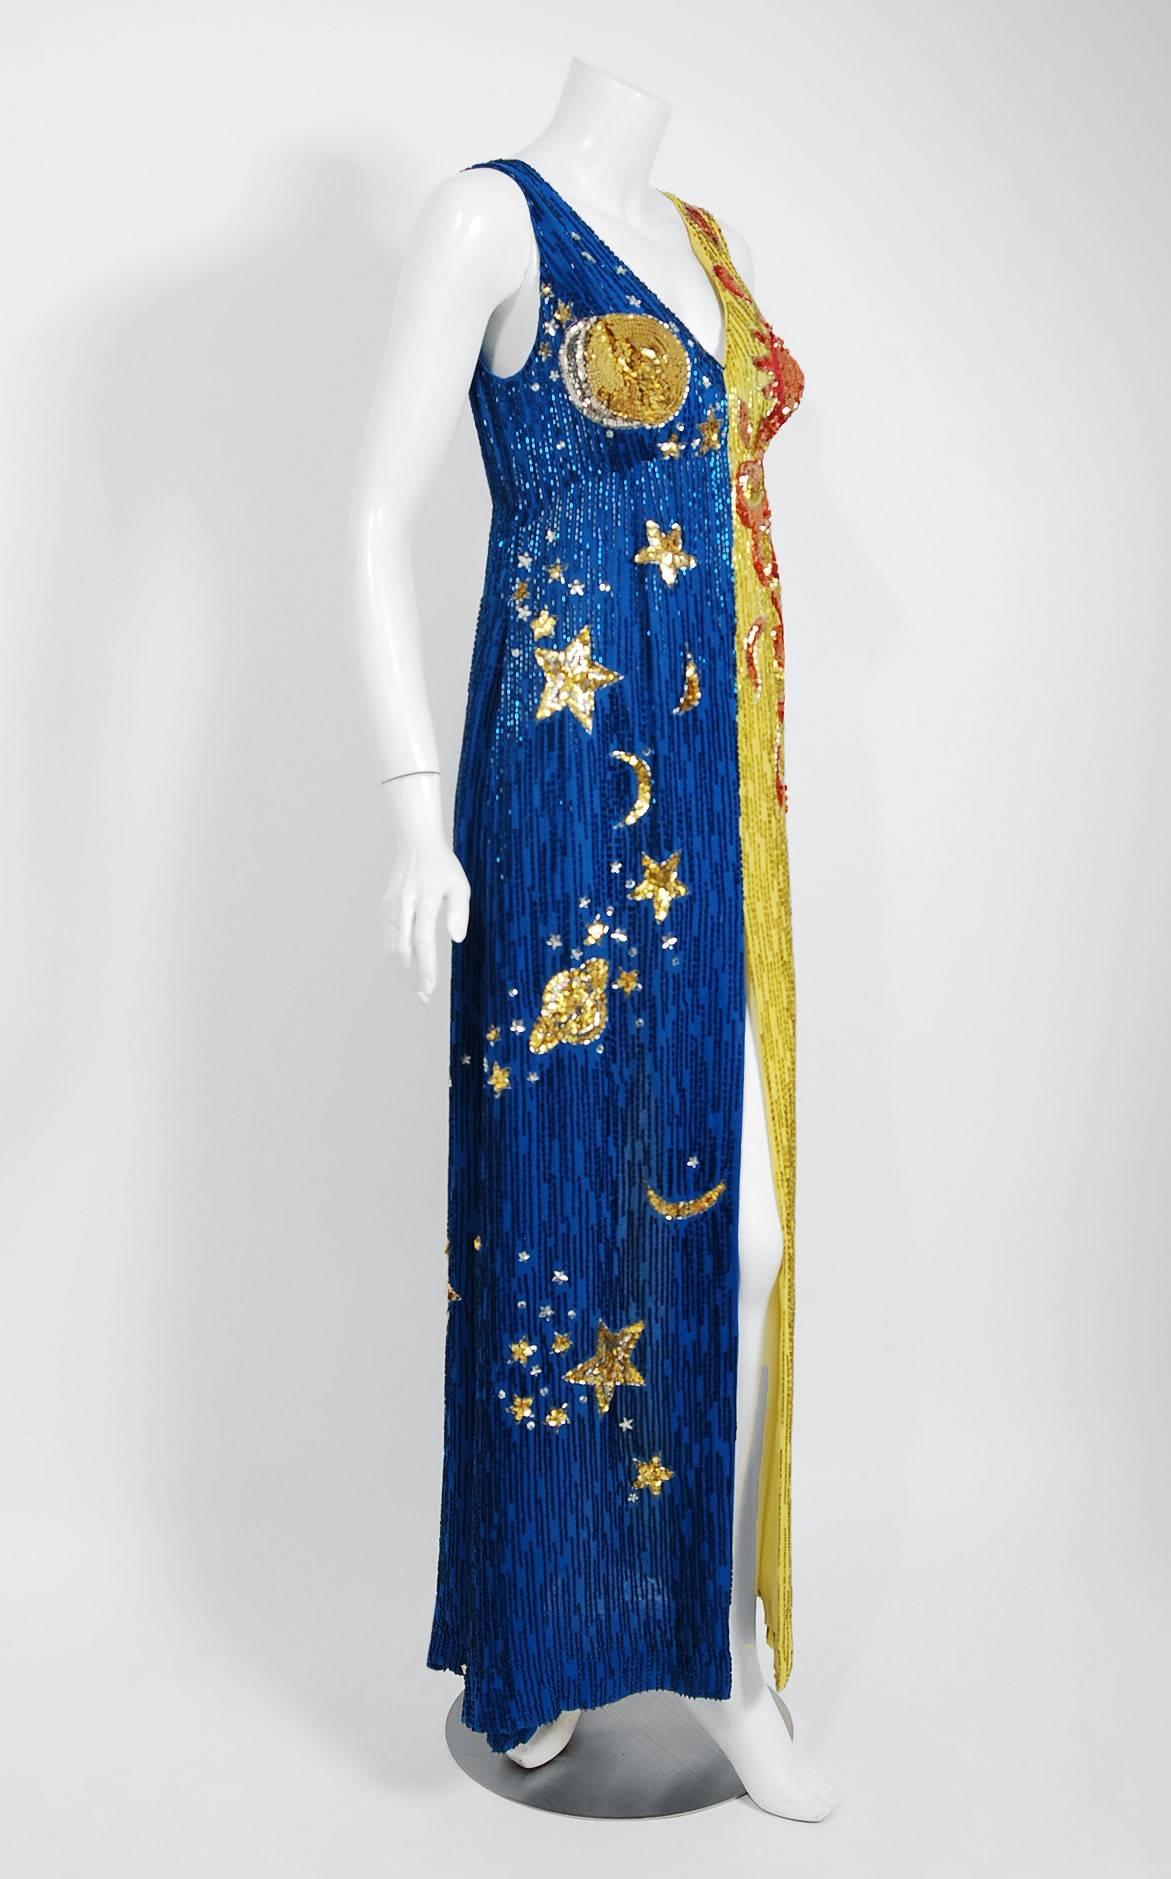 Breathtaking Boyd Clopton Couture celestial sun and moon novelty gown dating back to the late 1960's. Boyd Clopton was an acclaimed costume designer during the 1960's and 1970's, dressing some of the top musical groups and soloists of the era.  He